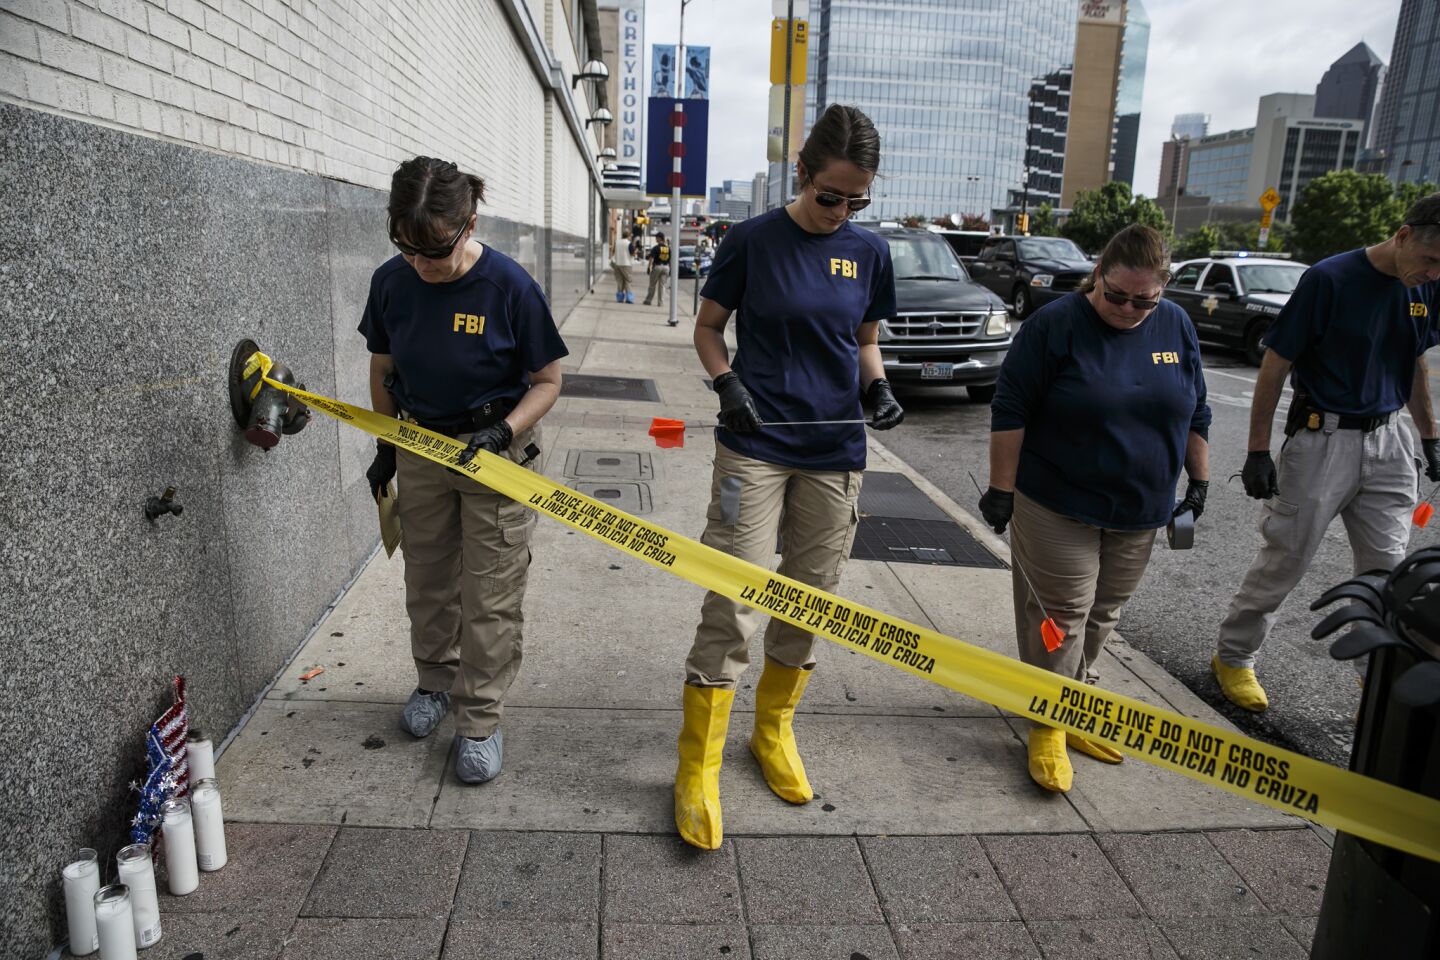 Investigators comb through the crime scene for evidence outside El Centro College on Lamar Street in Dallas where a gunman killed five police officers and wounded seven others.